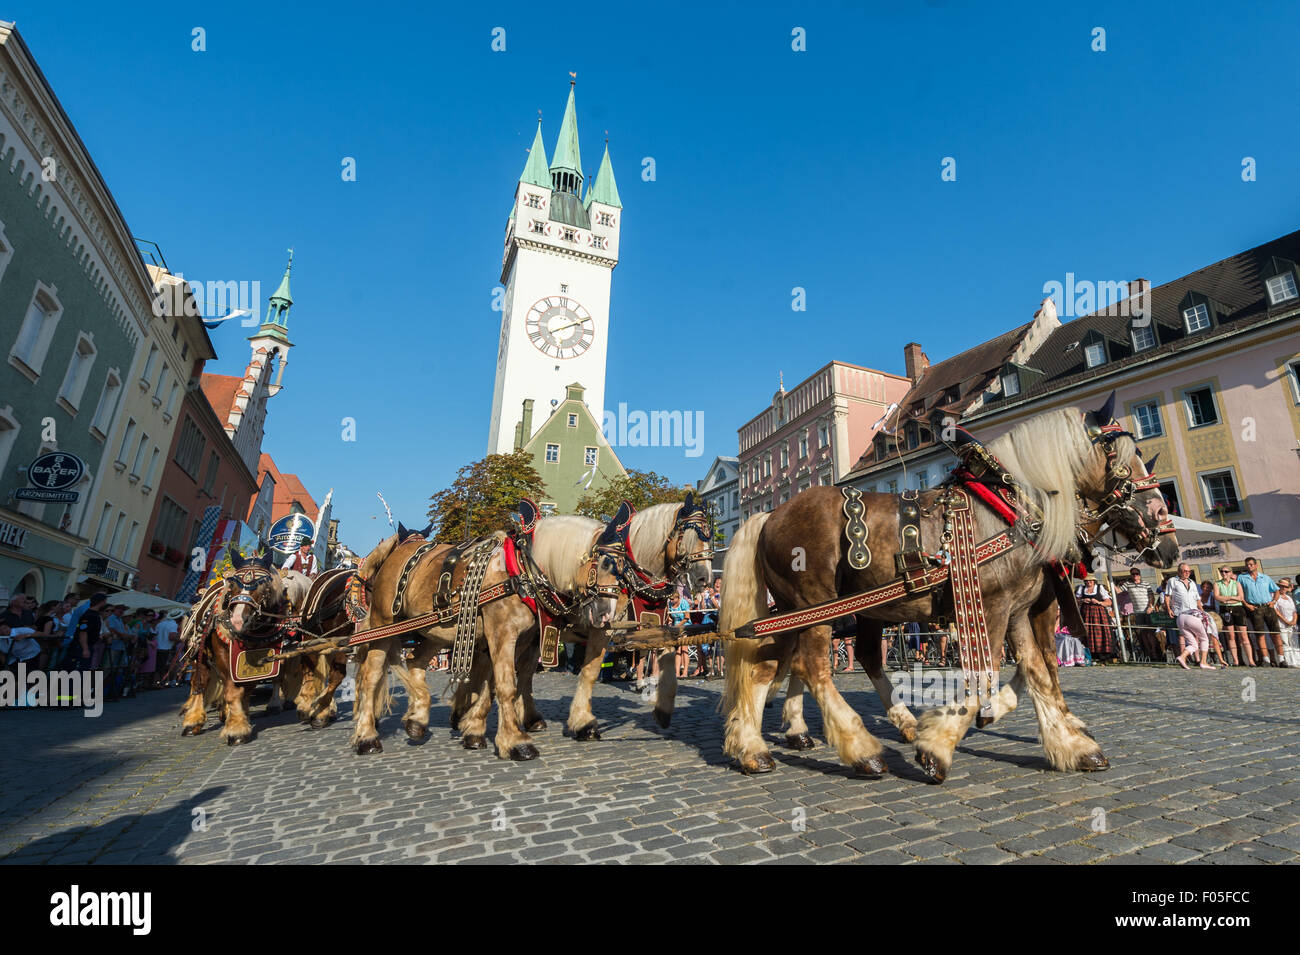 Straubing, Germany. 7th Aug, 2015. A brewery wagon in the traditional procession at the Gaeubodenvolksfest in Straubing, Germany, 7 August 2015. Around 1.4 million visitors are expected to attend the festival by 17 August. PHOTO: ARMIN WEIGEL/DPA/Alamy Live News Stock Photo